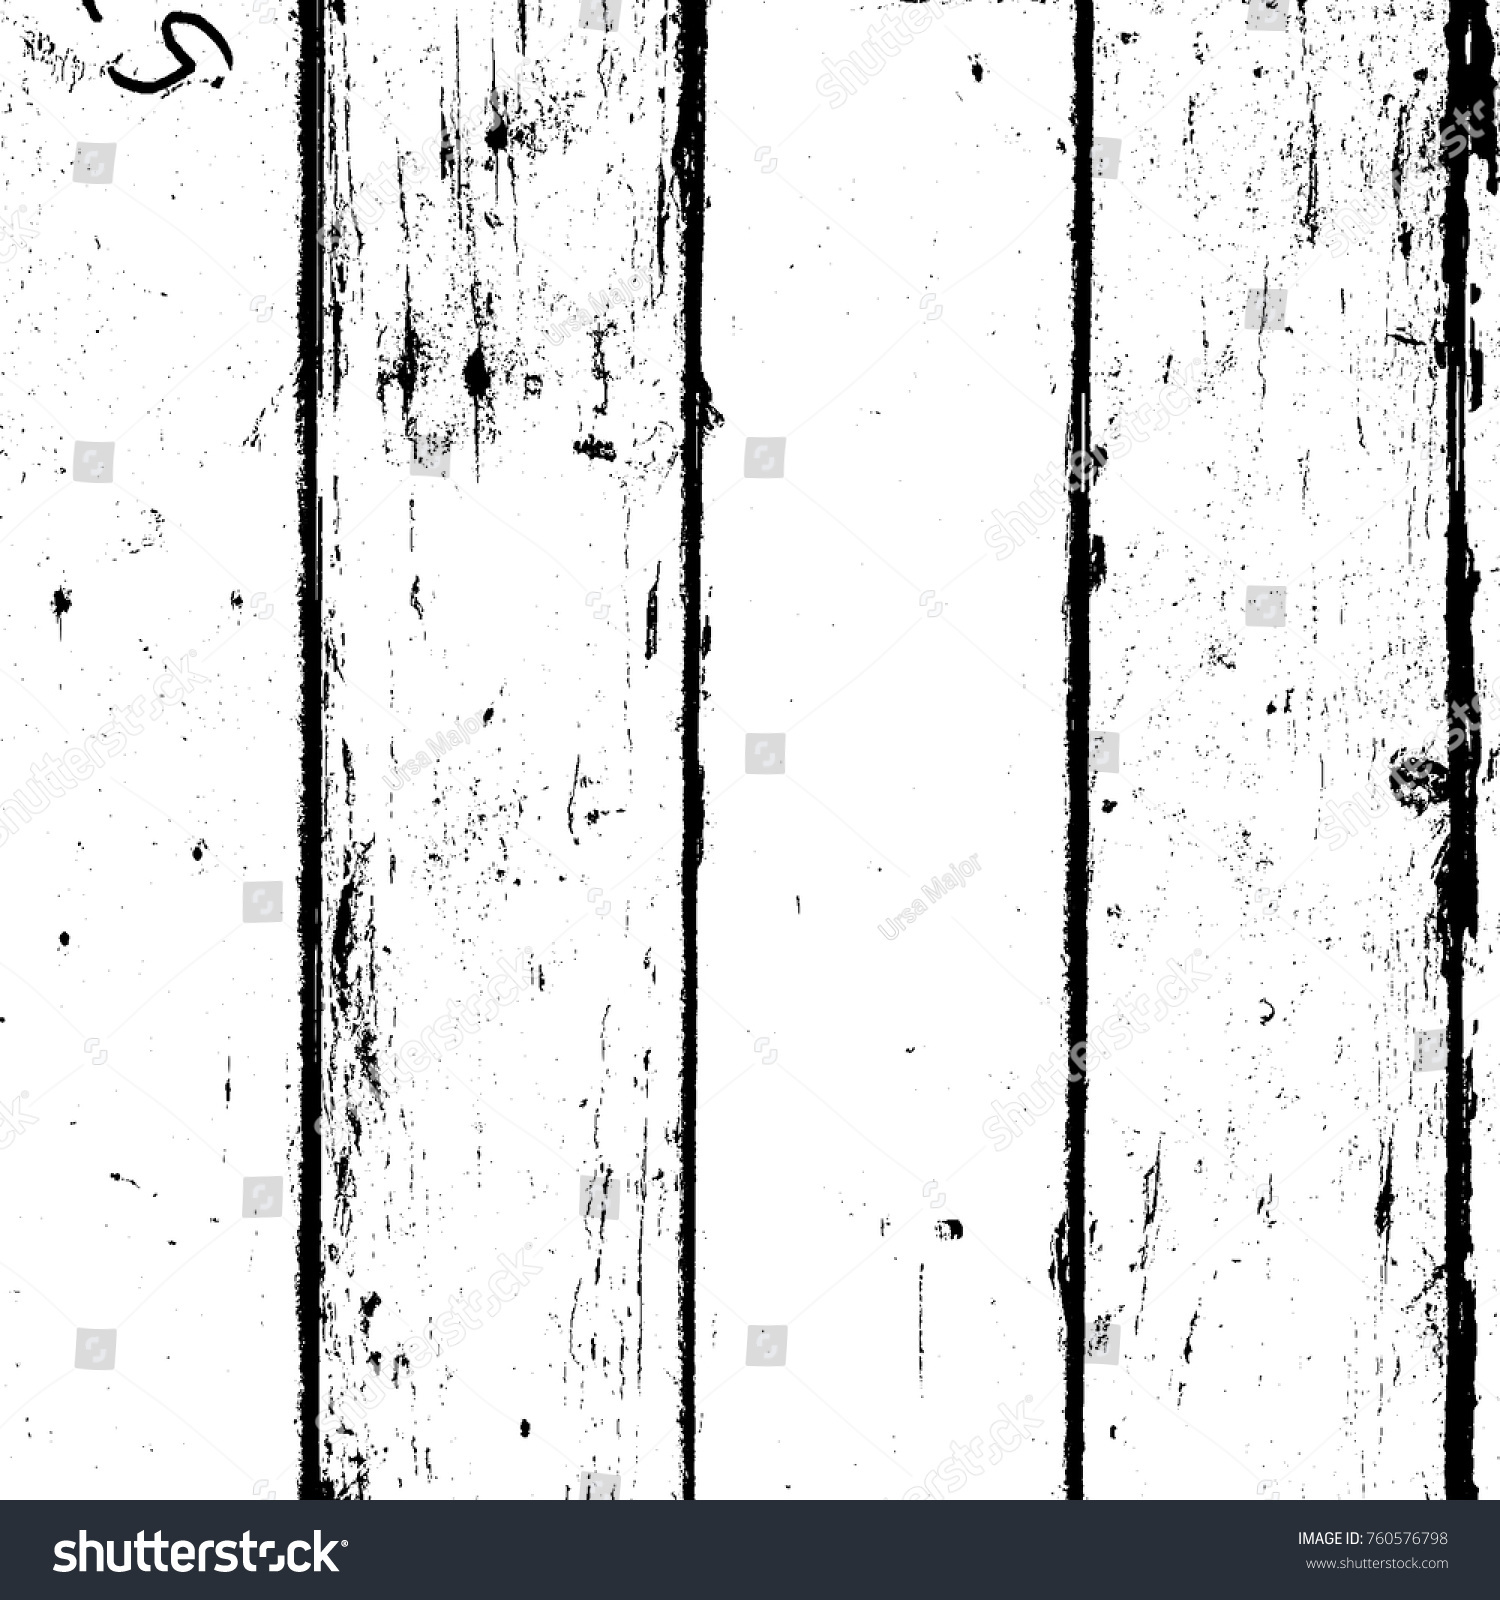 Distressed Grainy Wood Overlay Texture Grunge Stock Vector 760576798 ...